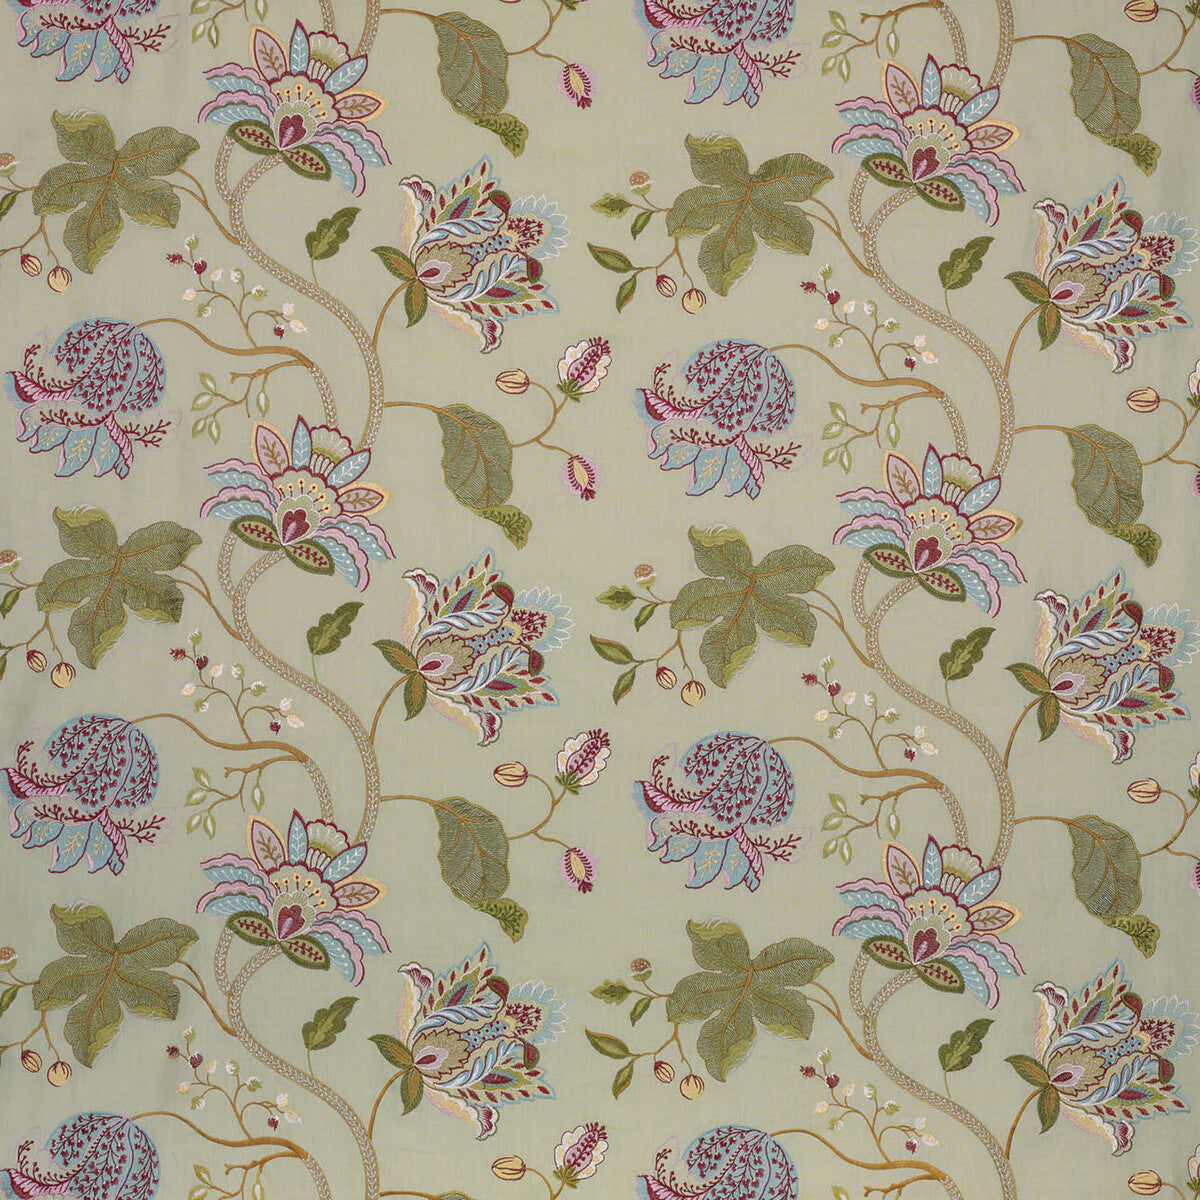 Devereux Linen fabric in eau de nil/multi color - pattern BF10508.1.0 - by G P &amp; J Baker in the Larkhill collection